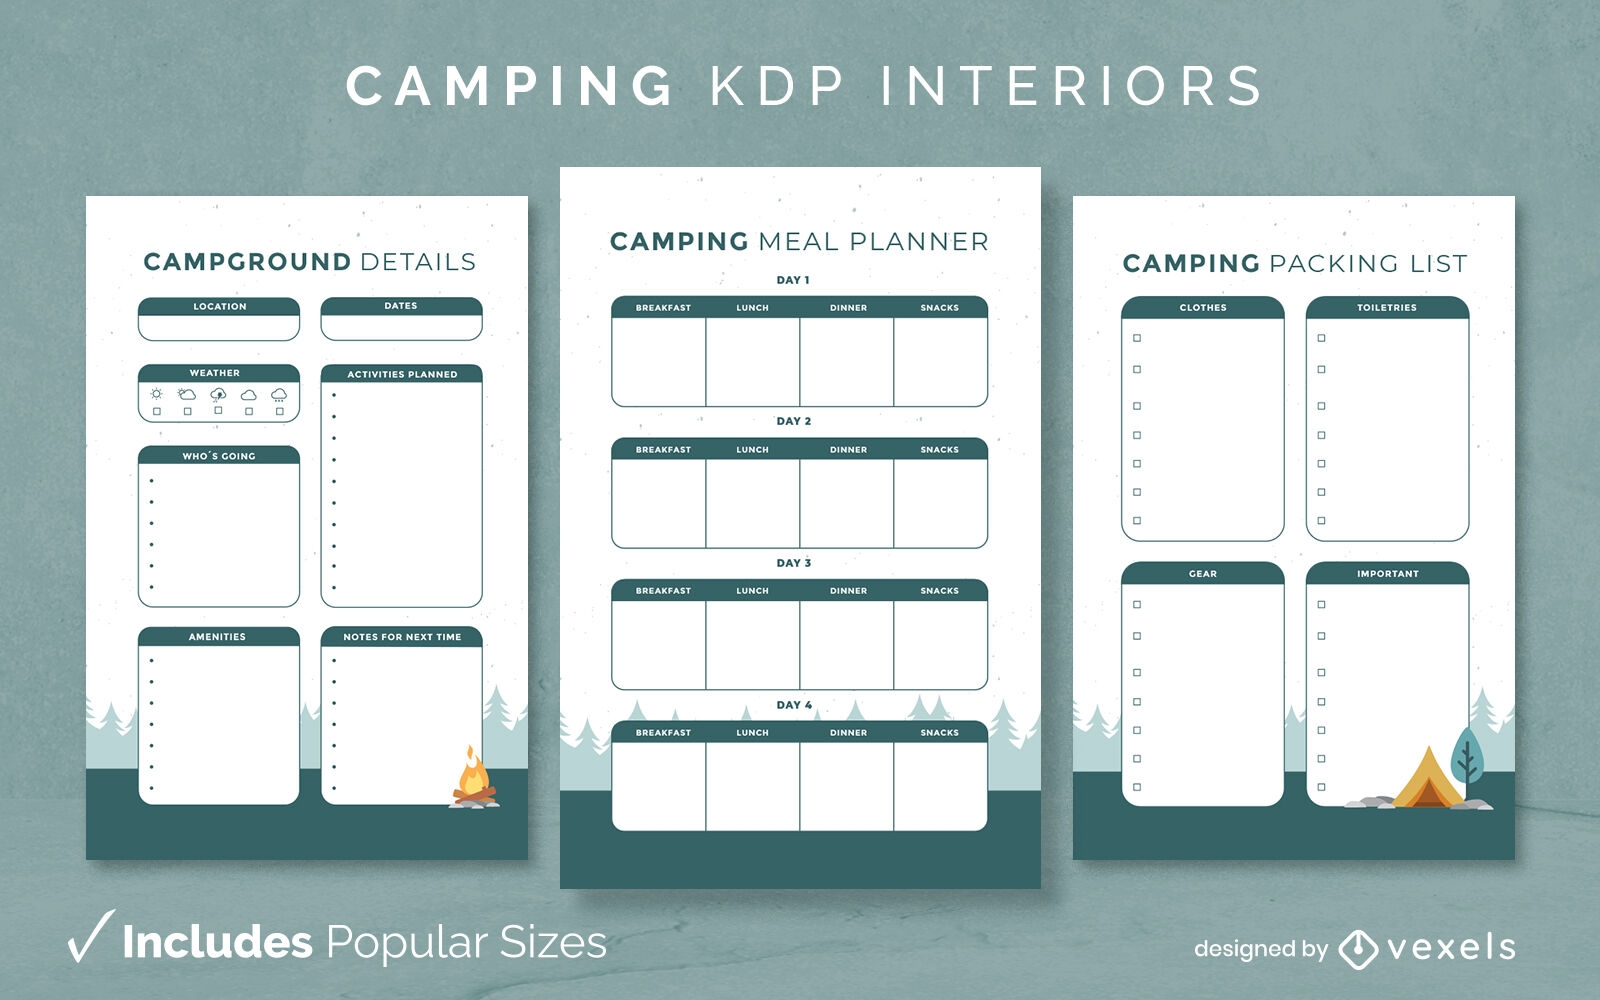 Camping kdp interior design pages